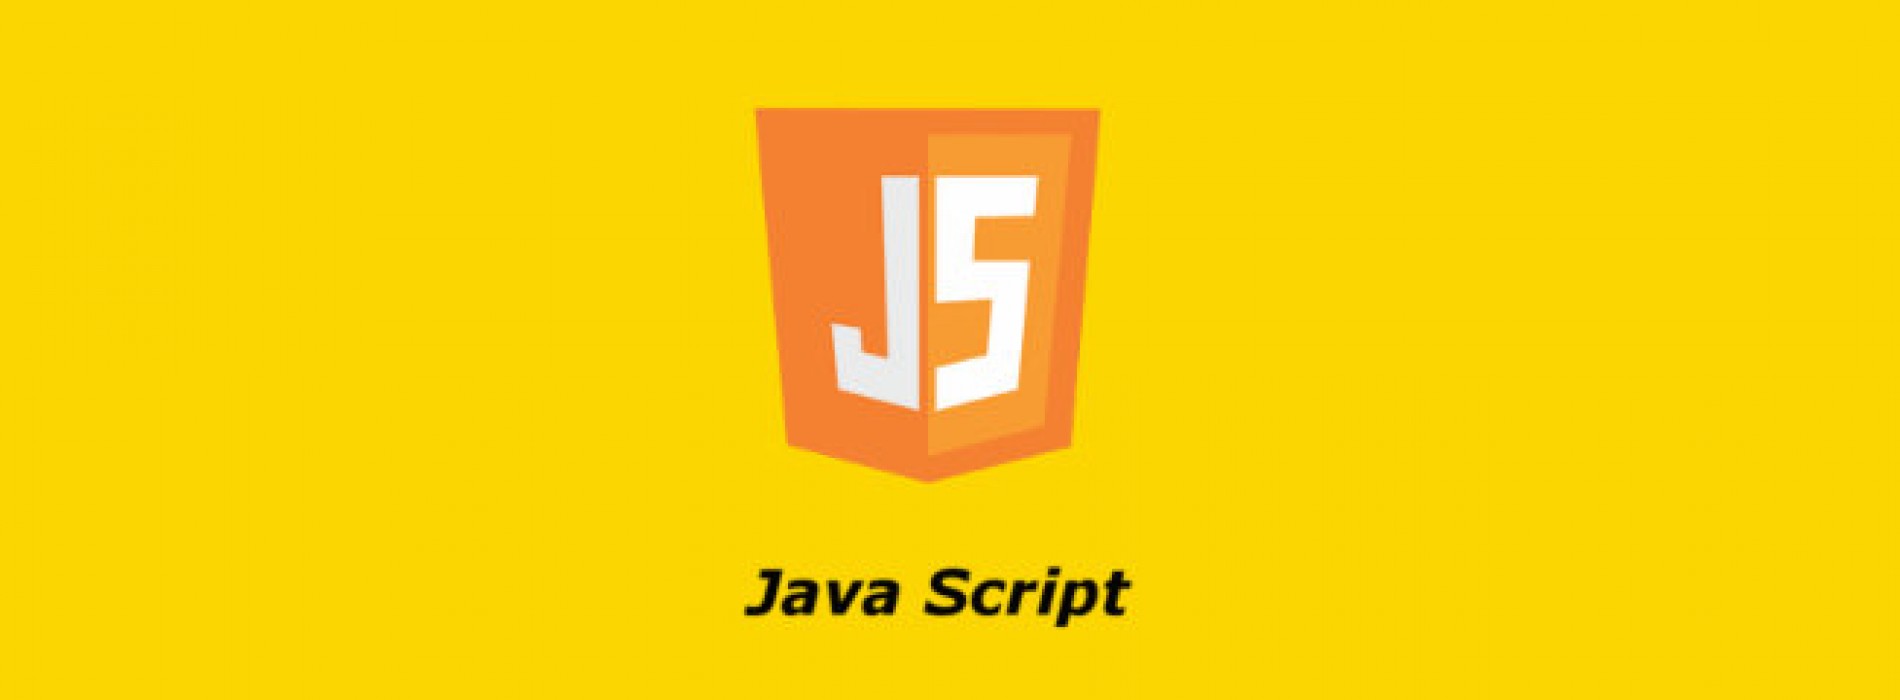 Buggy JavaScript Code: The 10 Most